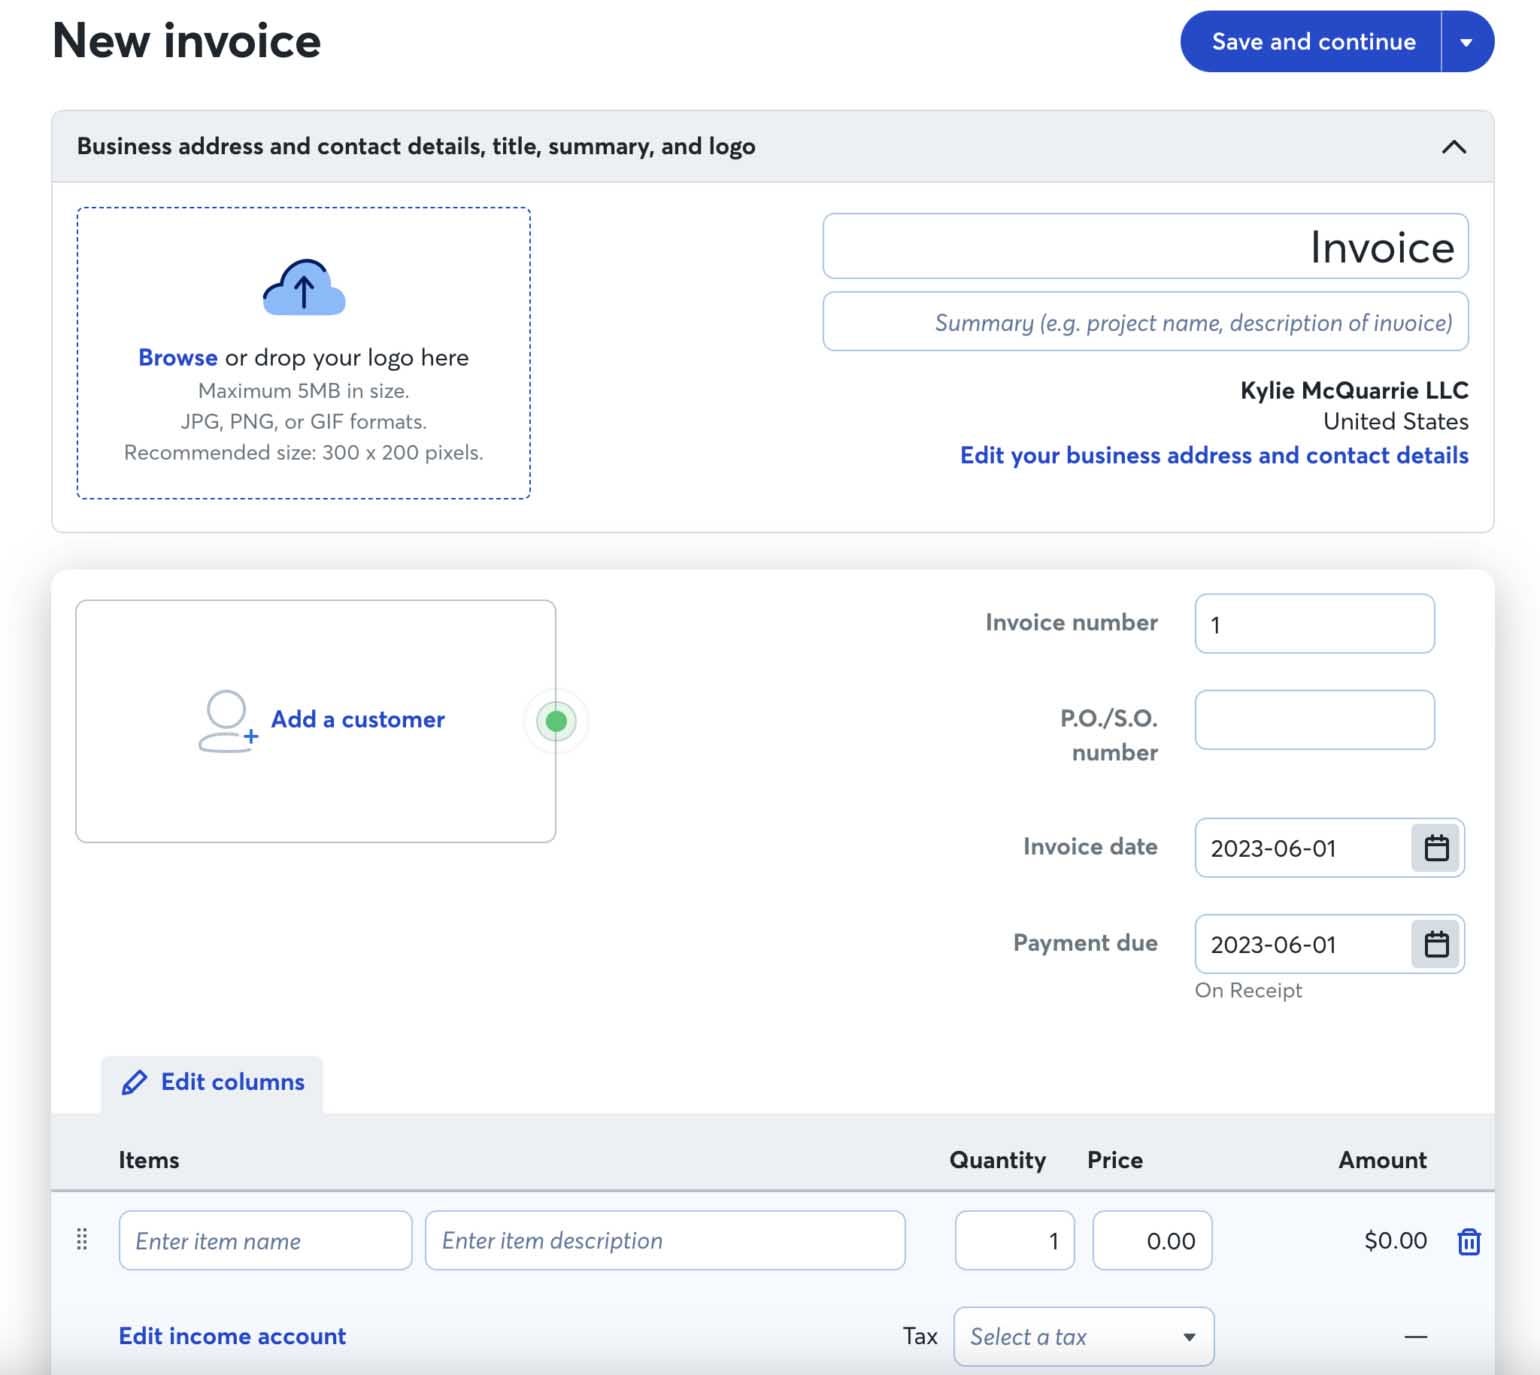 Wave's invoice template takes no more than a few seconds to set up and customize. You can also schedule recurring invoices for repeat customers and configure your invoice template to accept payments within the invoice.